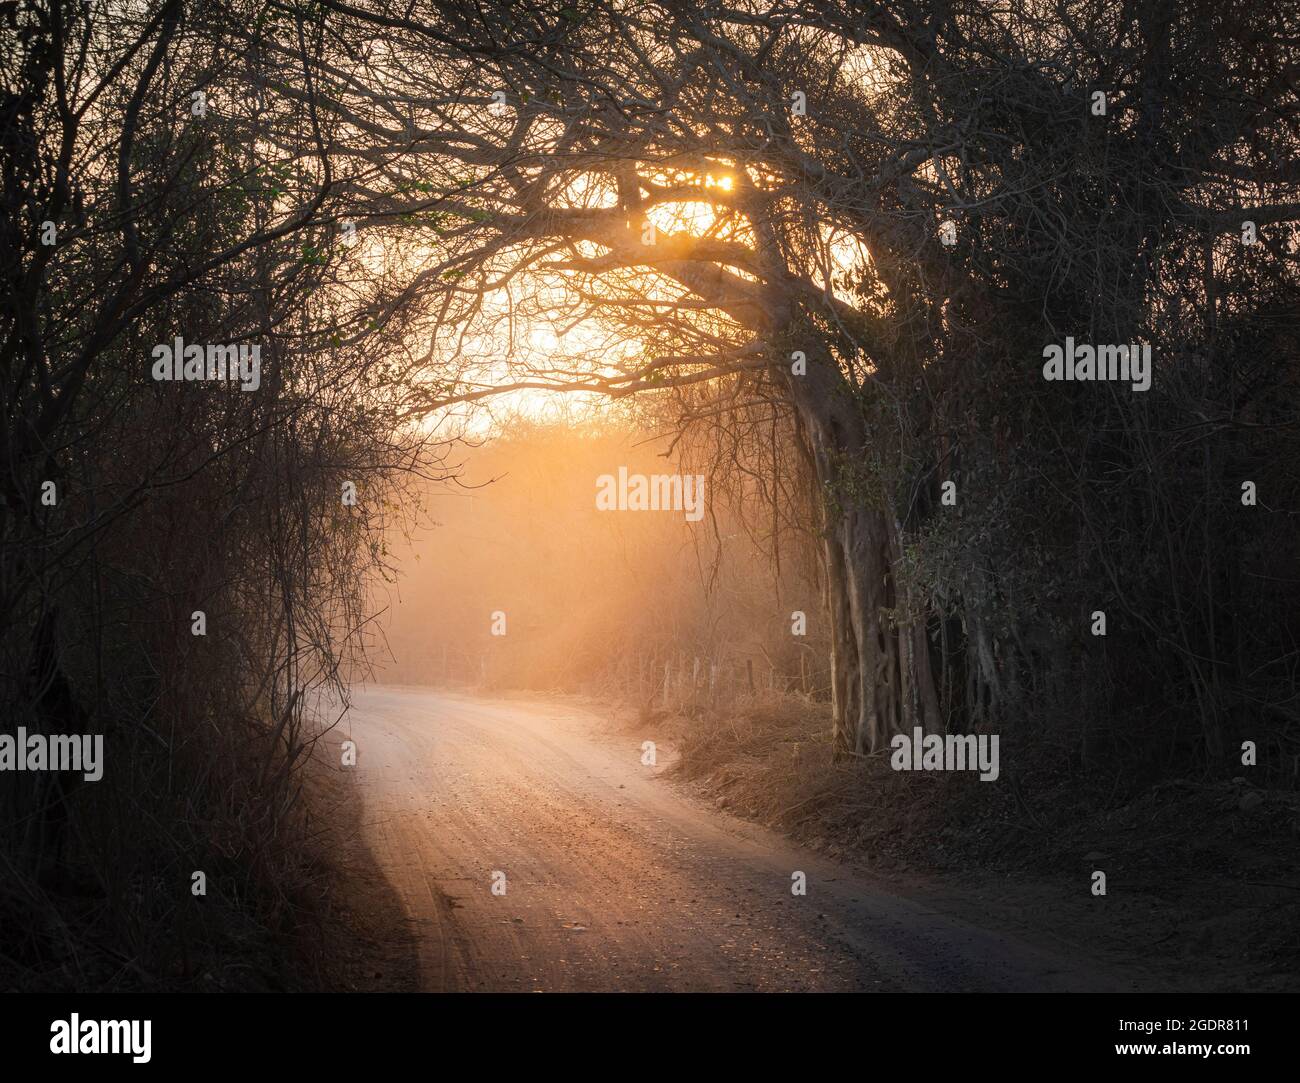 Early morning sunlight filters through trees on a country road near Morelos, Jalisco, Mexico. Stock Photo